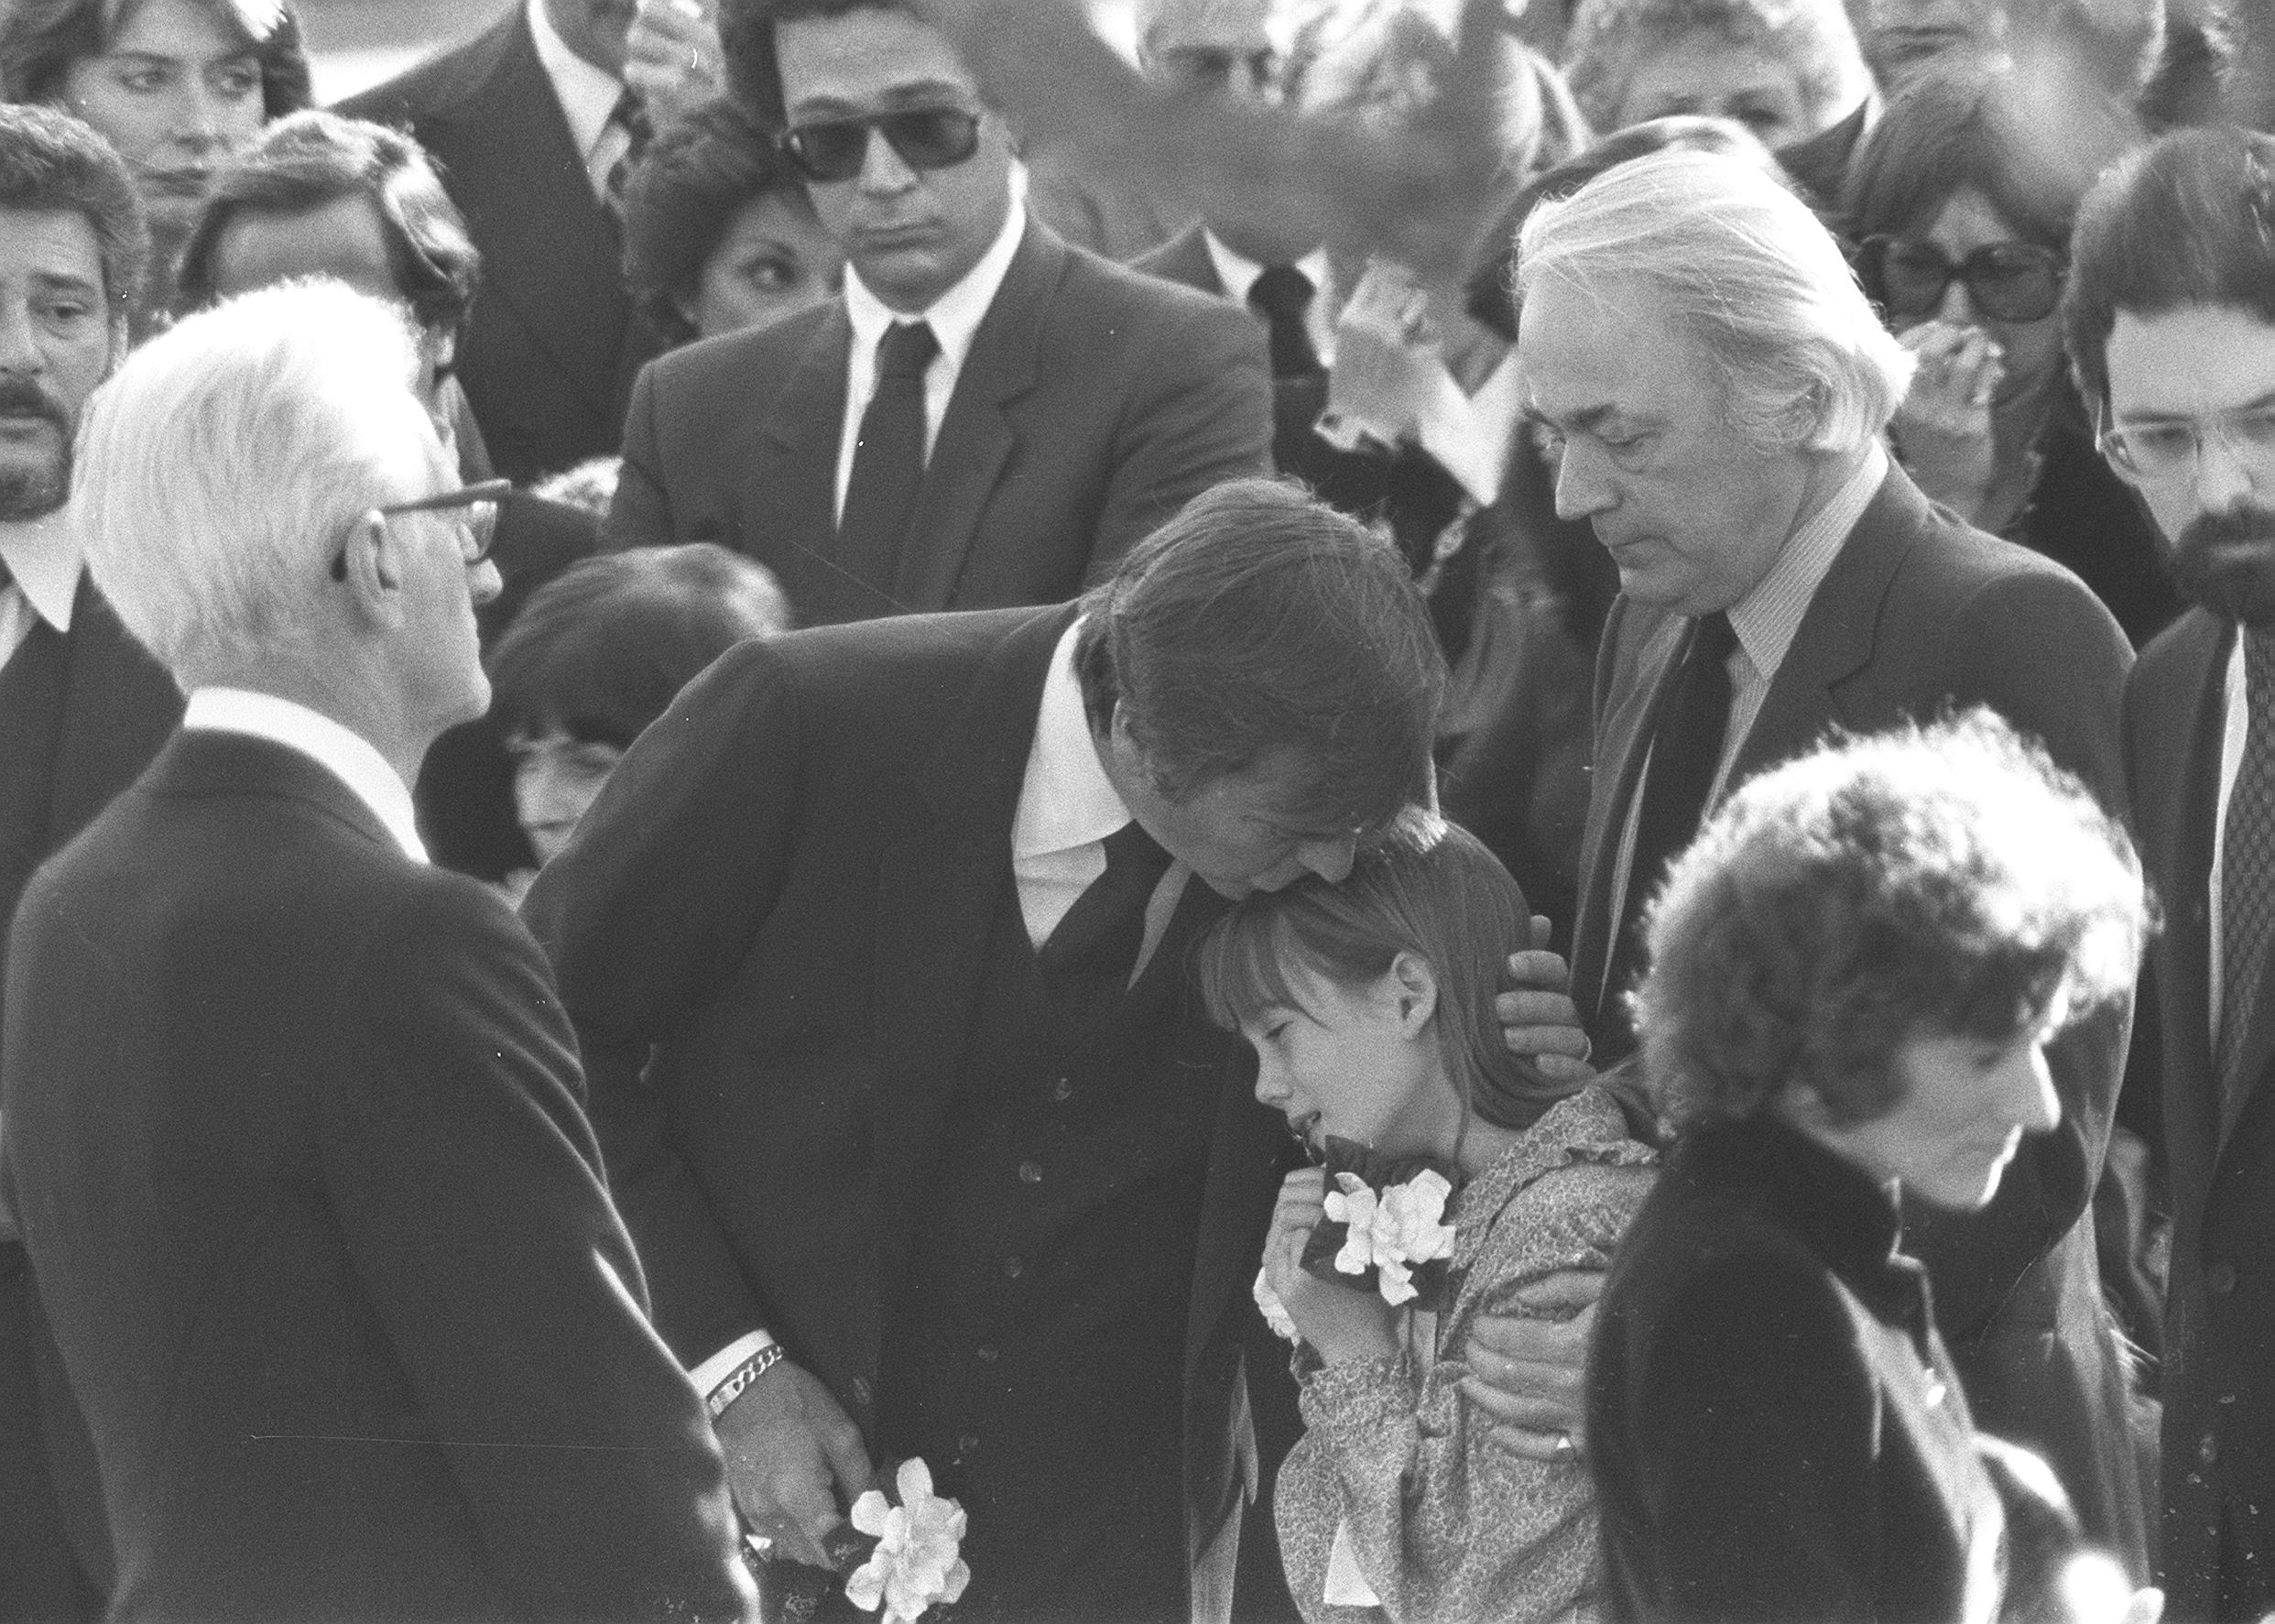 Robert Wagner comforting his daughter Courtney at her mother's funeral in California in 1981 | Source: Getty Images